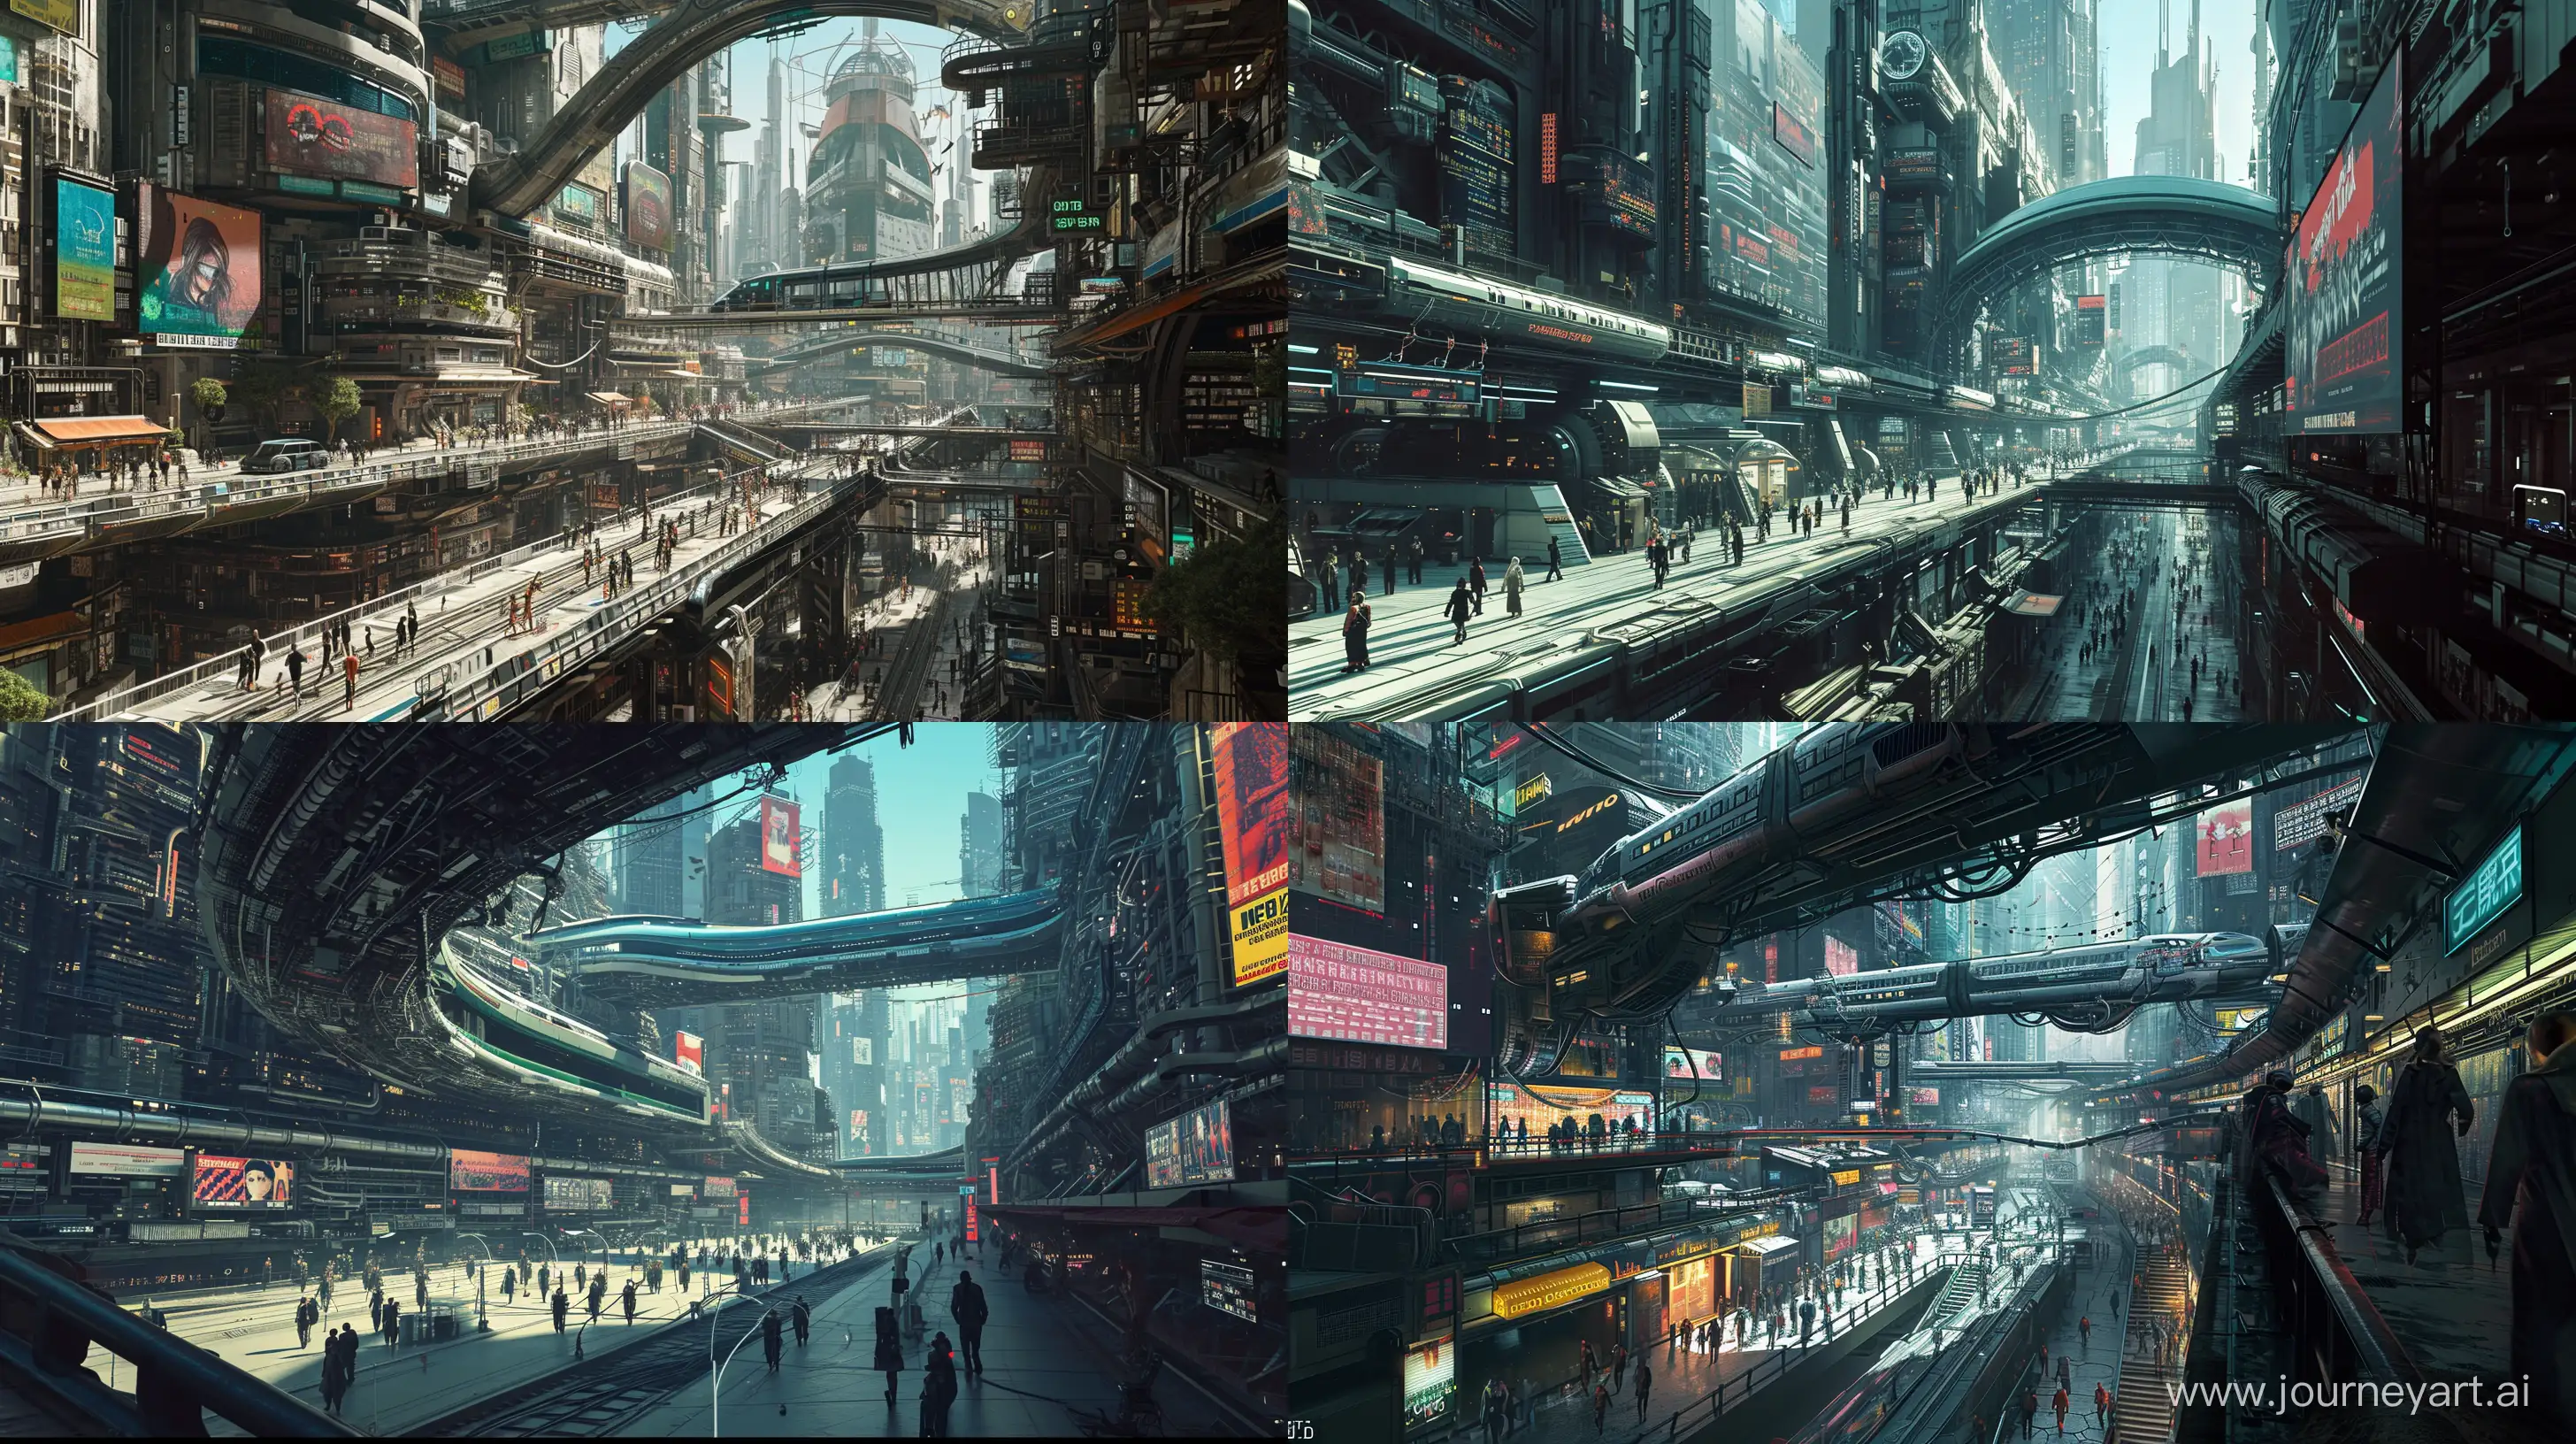 Futuristic-Cyberpunk-Cityscape-with-HighDensity-Buildings-and-Monorail-Trains